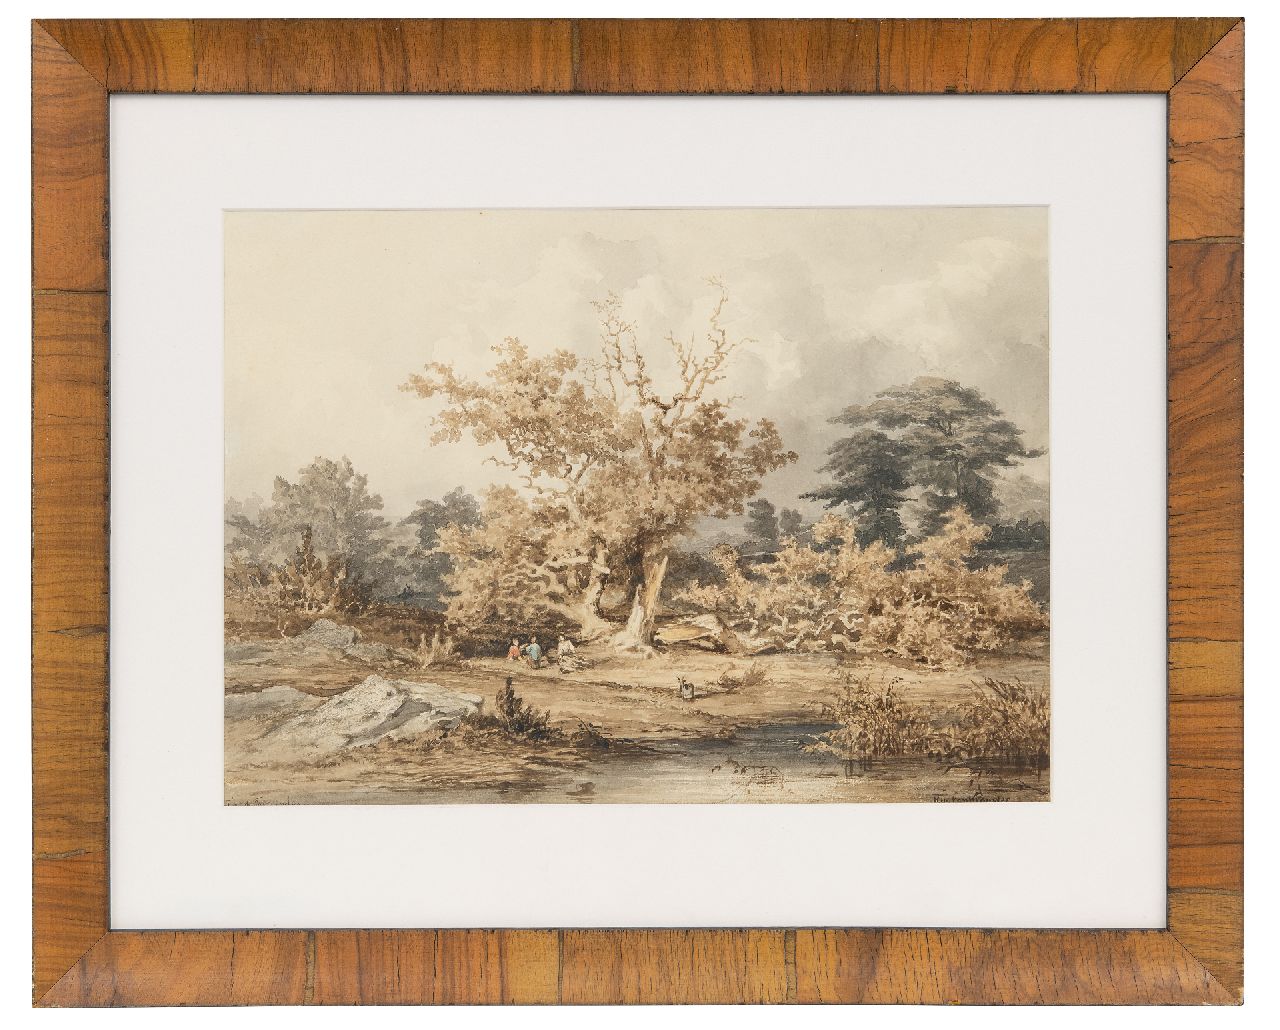 Kuytenbrouwer II M.A.  | Martinus Antonius Kuytenbrouwer II | Watercolours and drawings offered for sale | View of a pond in Fontainebleau forest, brown ink, black chalk and watercolour on paper 24.6 x 34.0 cm, signed l.r.